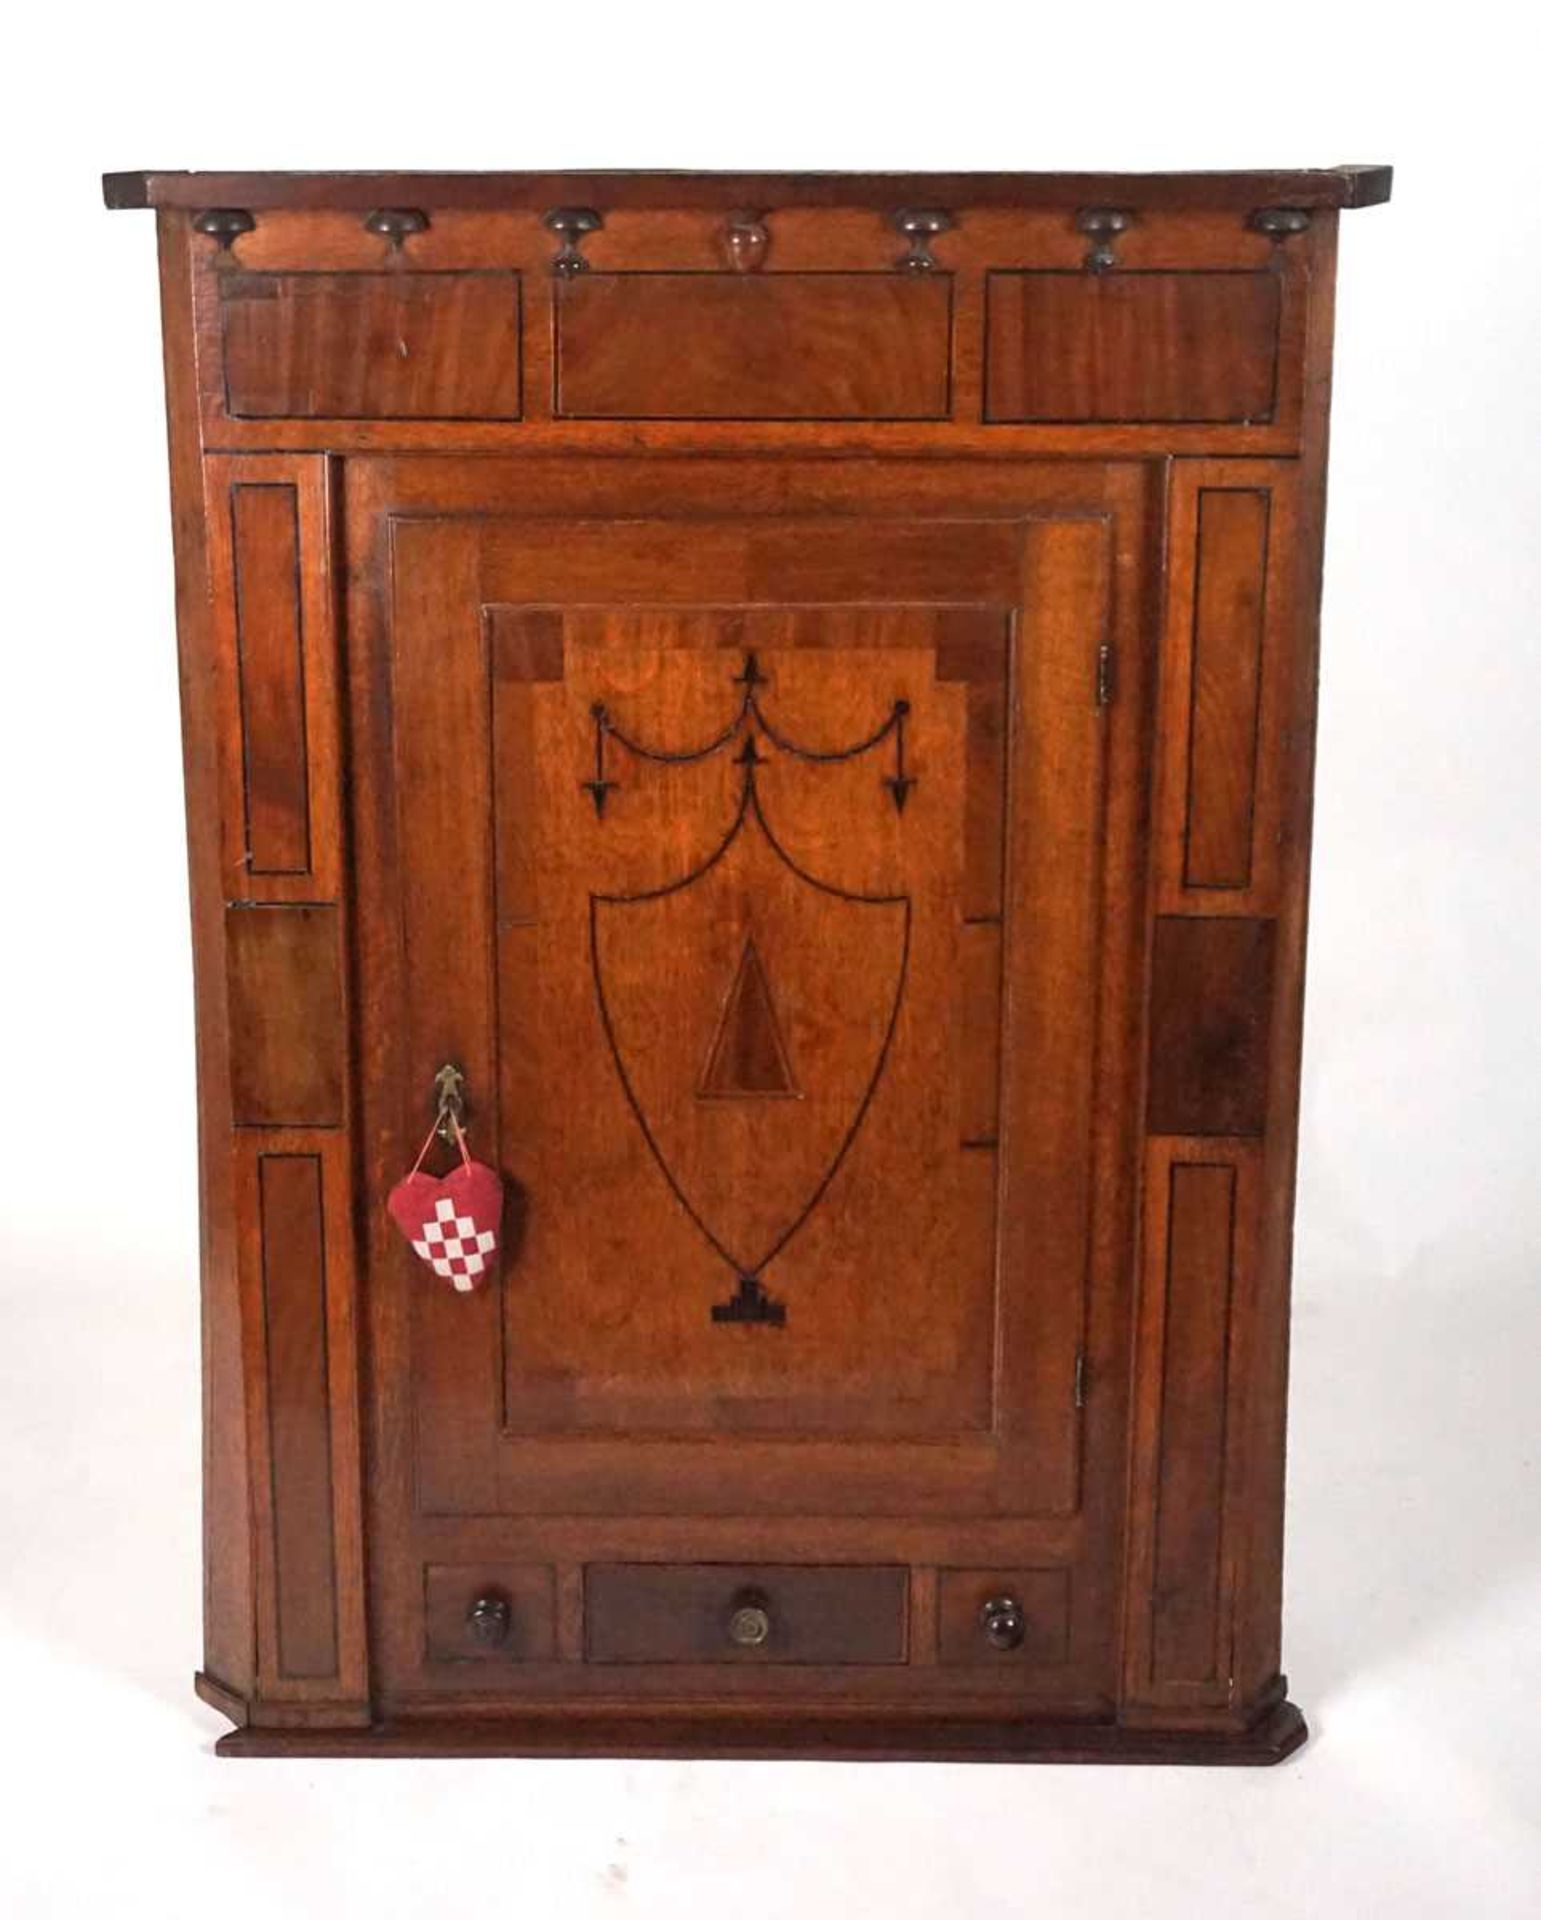 A provincial 19th century oak wall mounted corner cupboard, the door with inlaid ebony shield